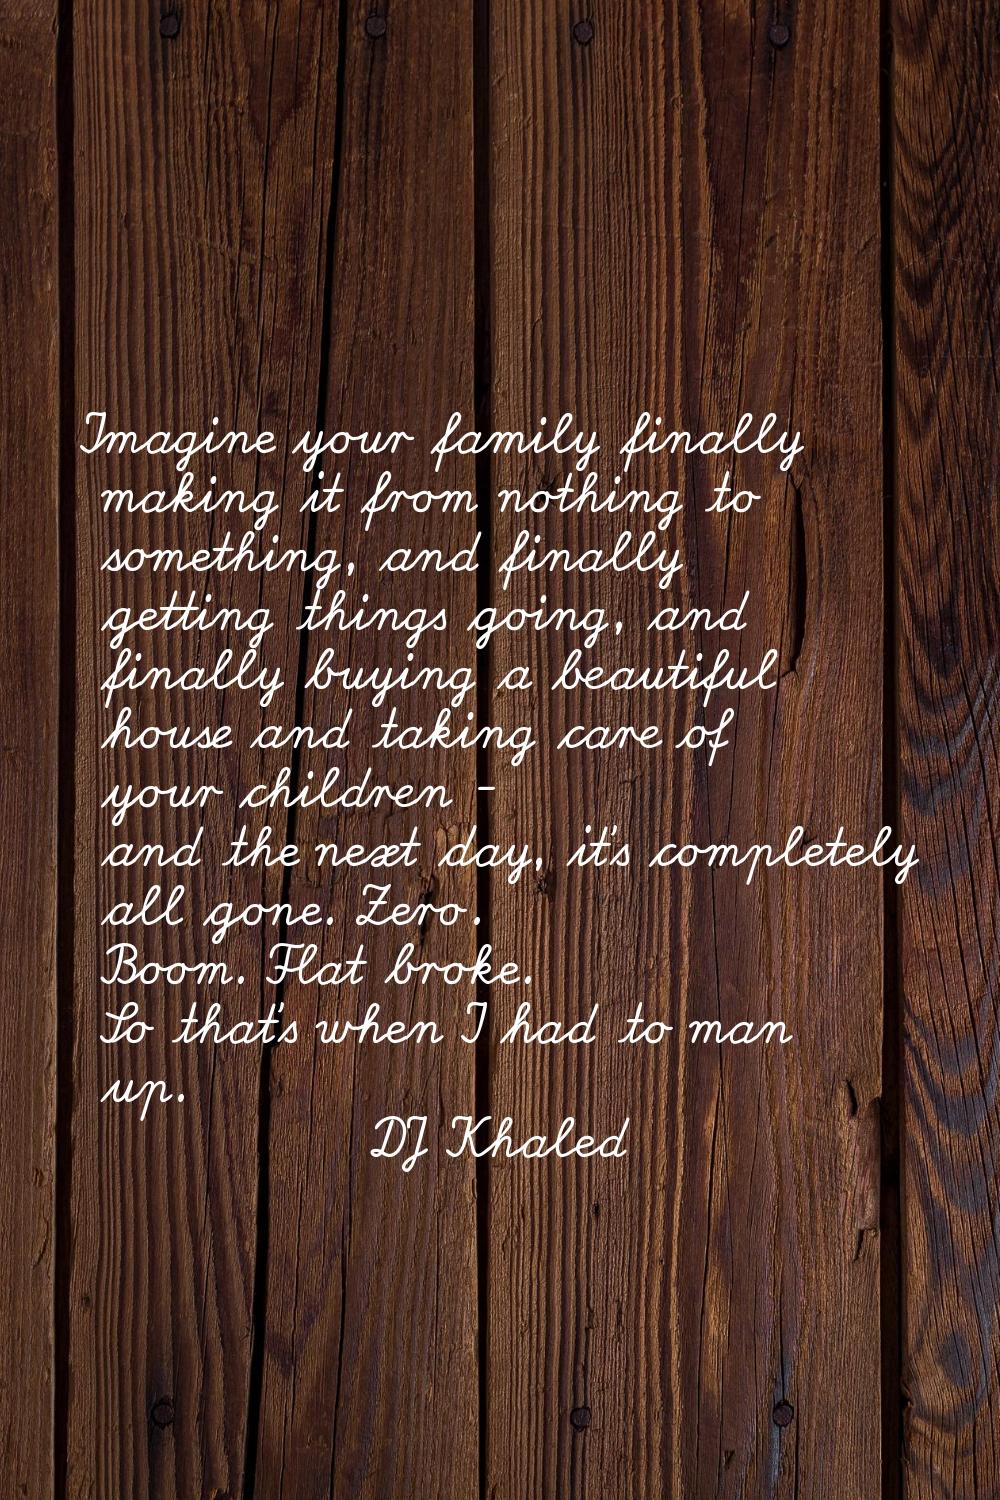 Imagine your family finally making it from nothing to something, and finally getting things going, 